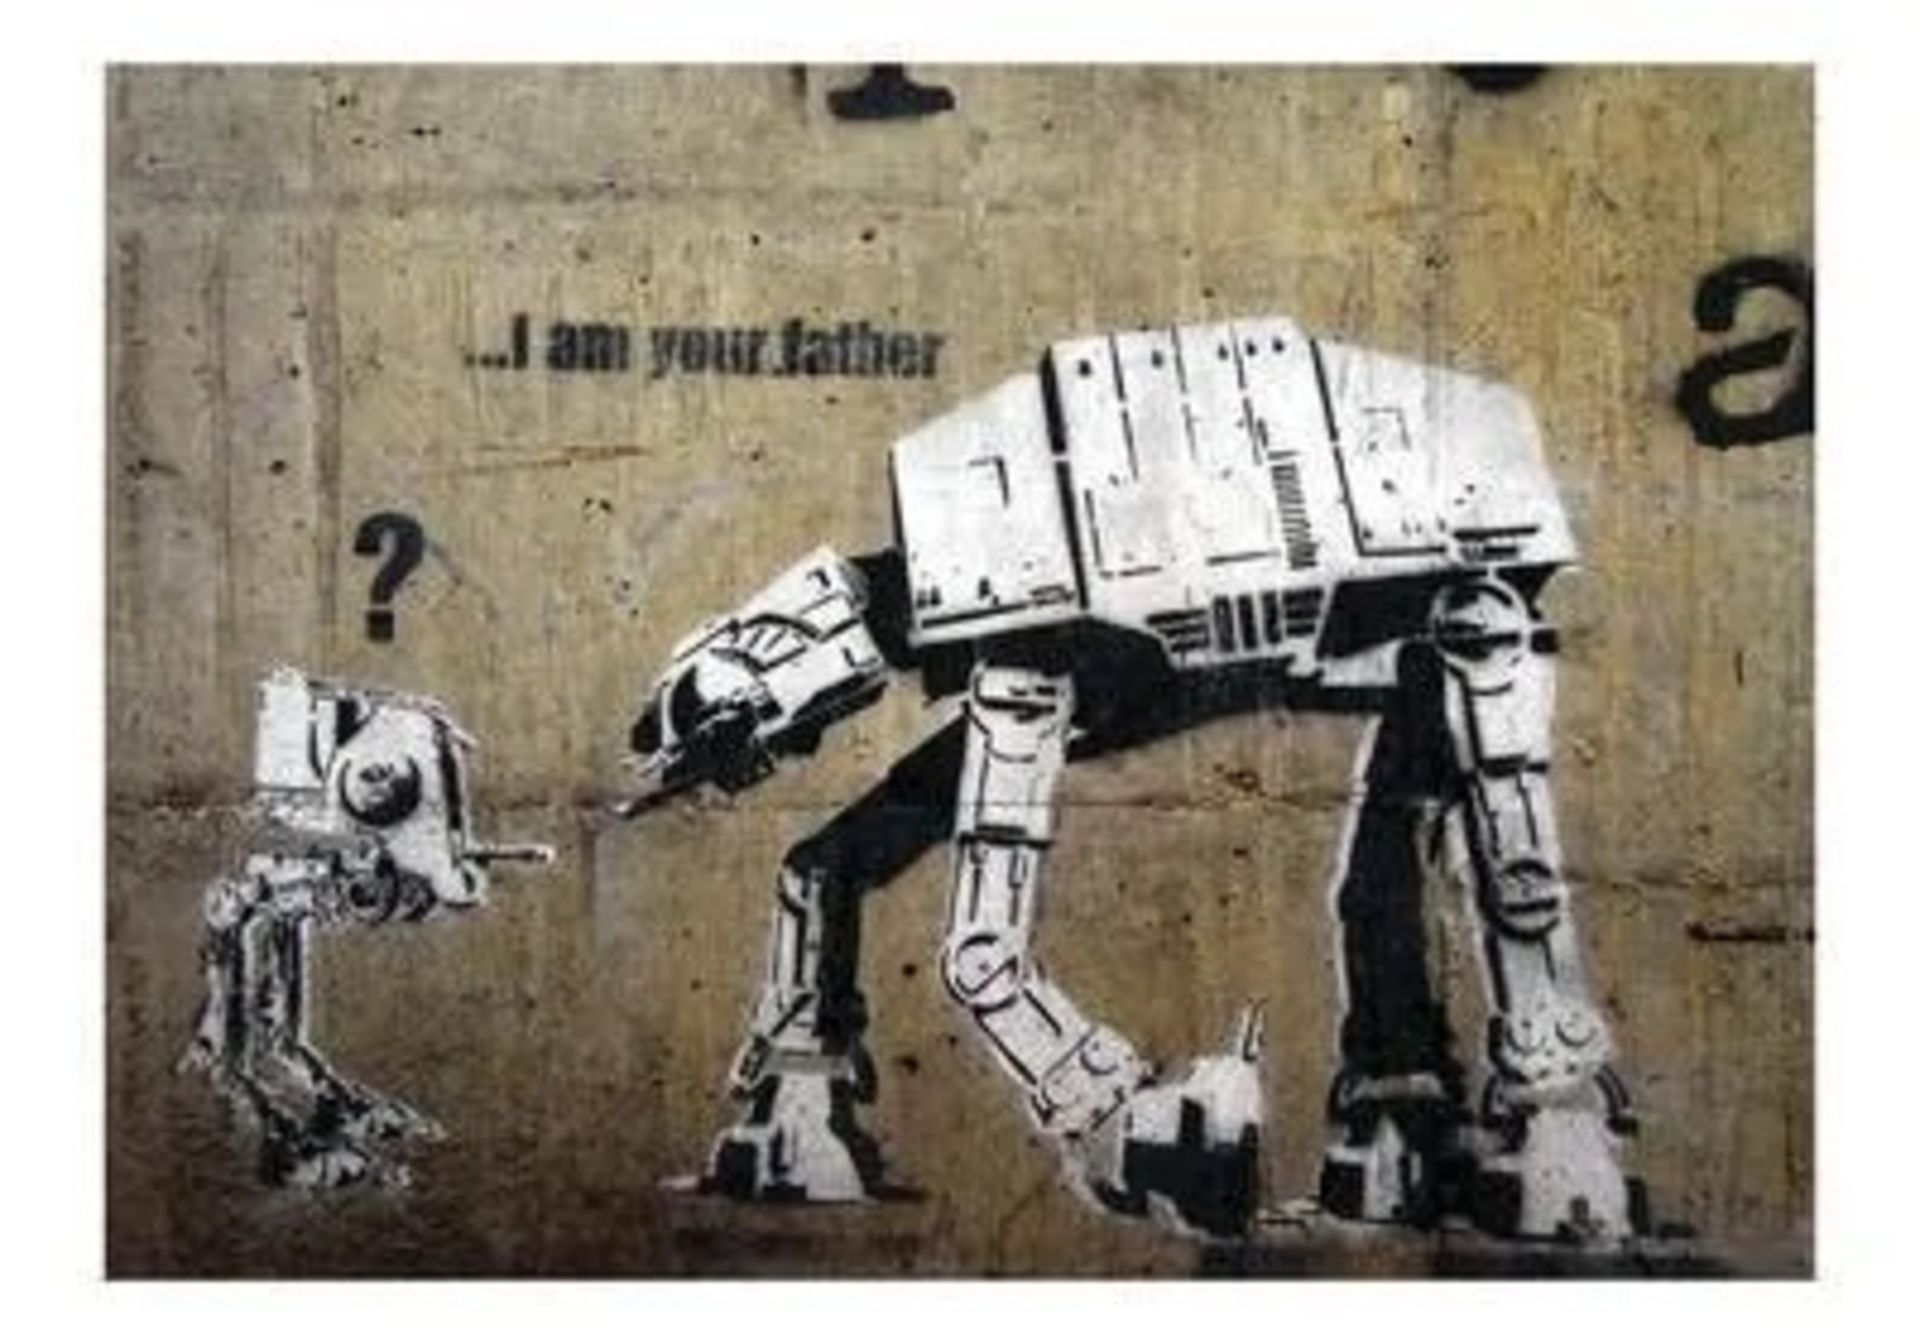 Banksy "Father" Offset Lithograph